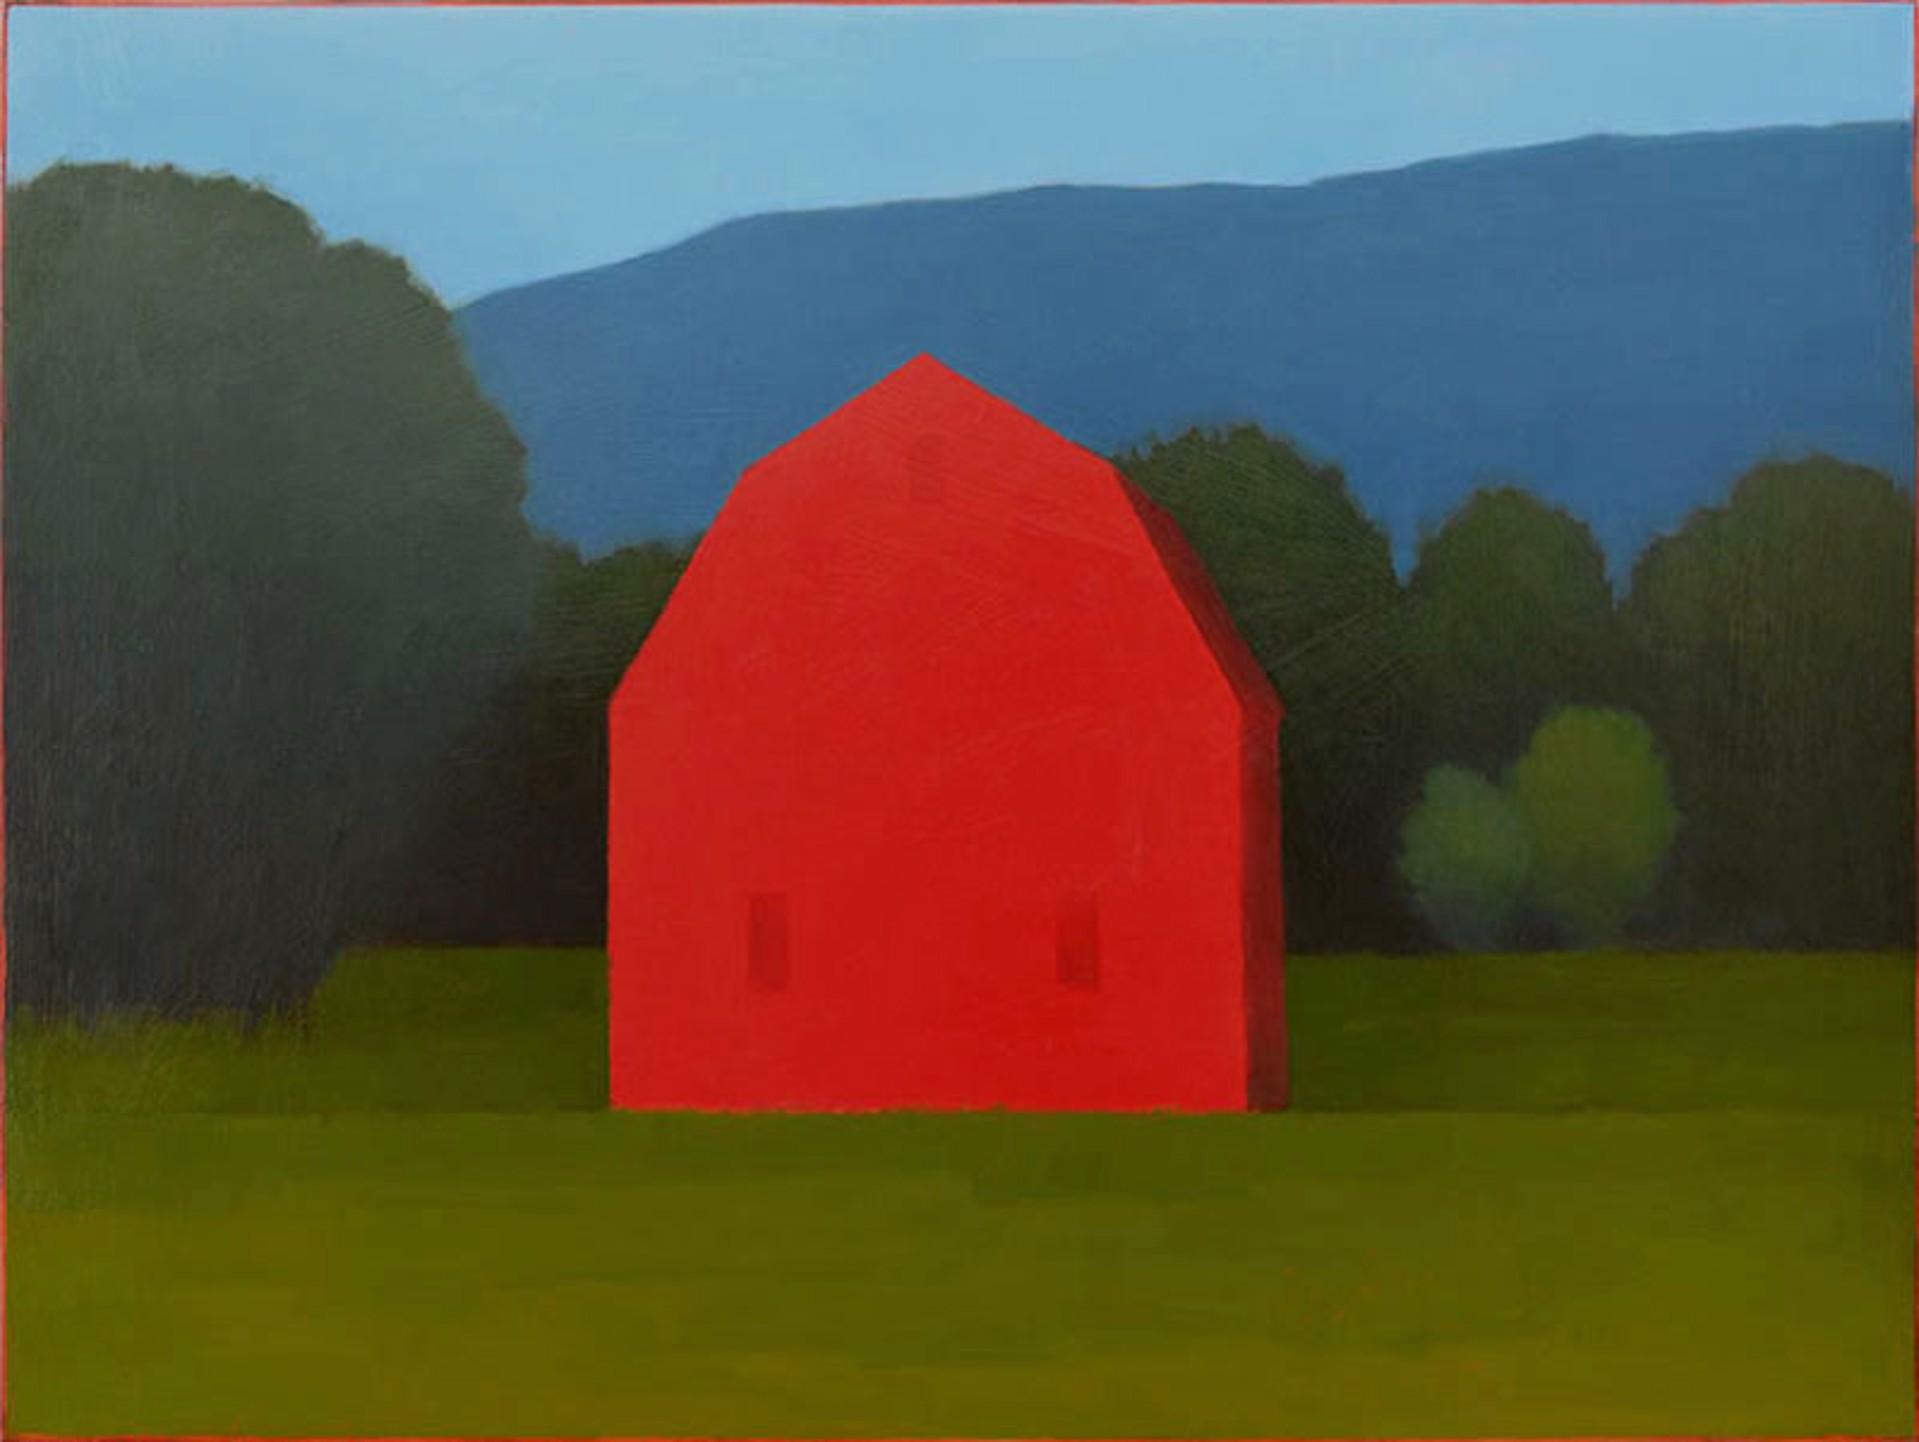 All Around the Red Barn by Tracy Helgeson